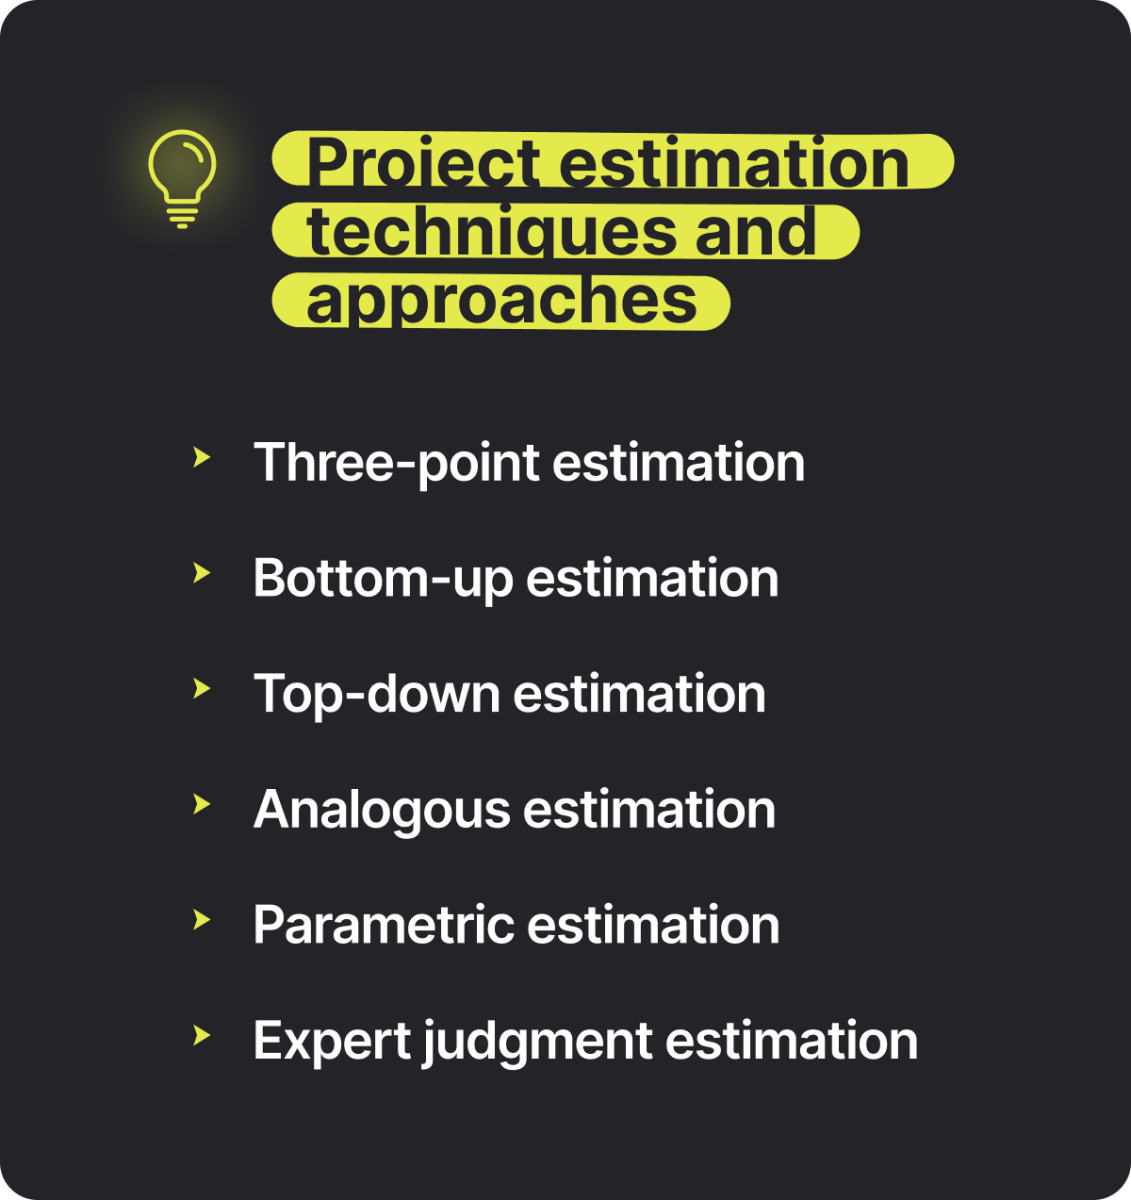 Illustration listing the 6 project estimation techniques and approaches discussed in this blog.